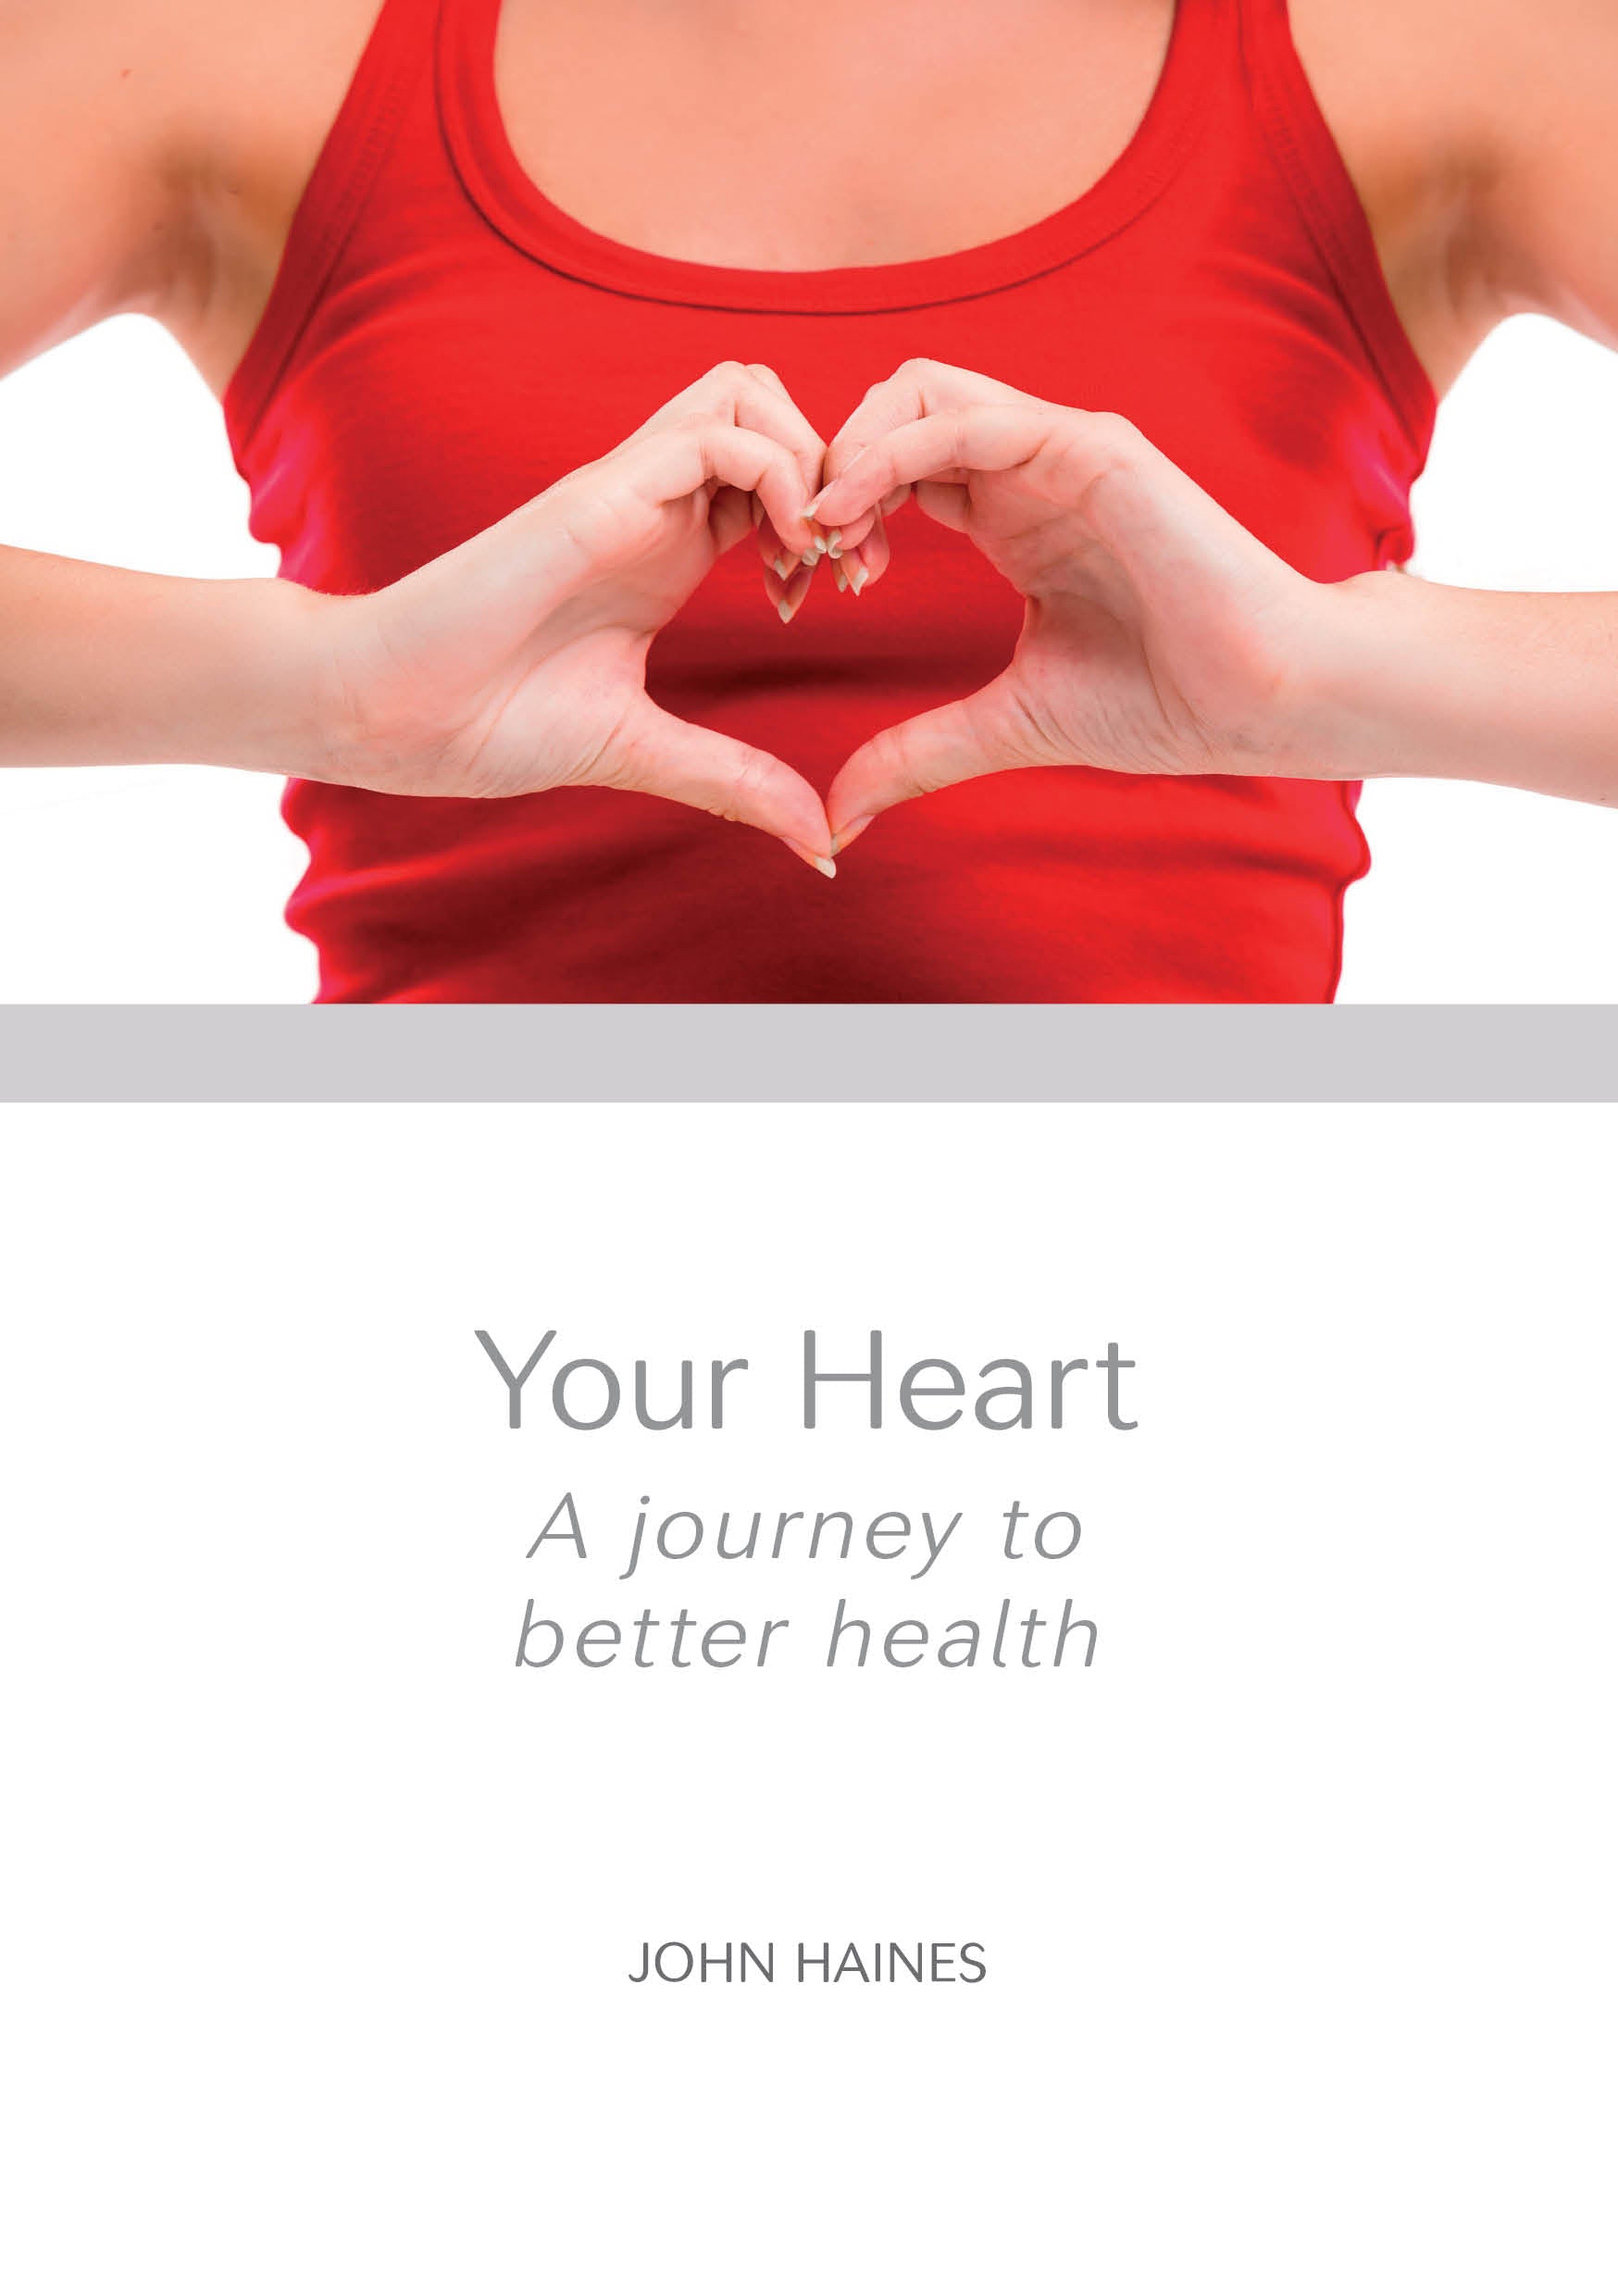 Your Heart Booklet | John Haines | Available from LivCor Australia